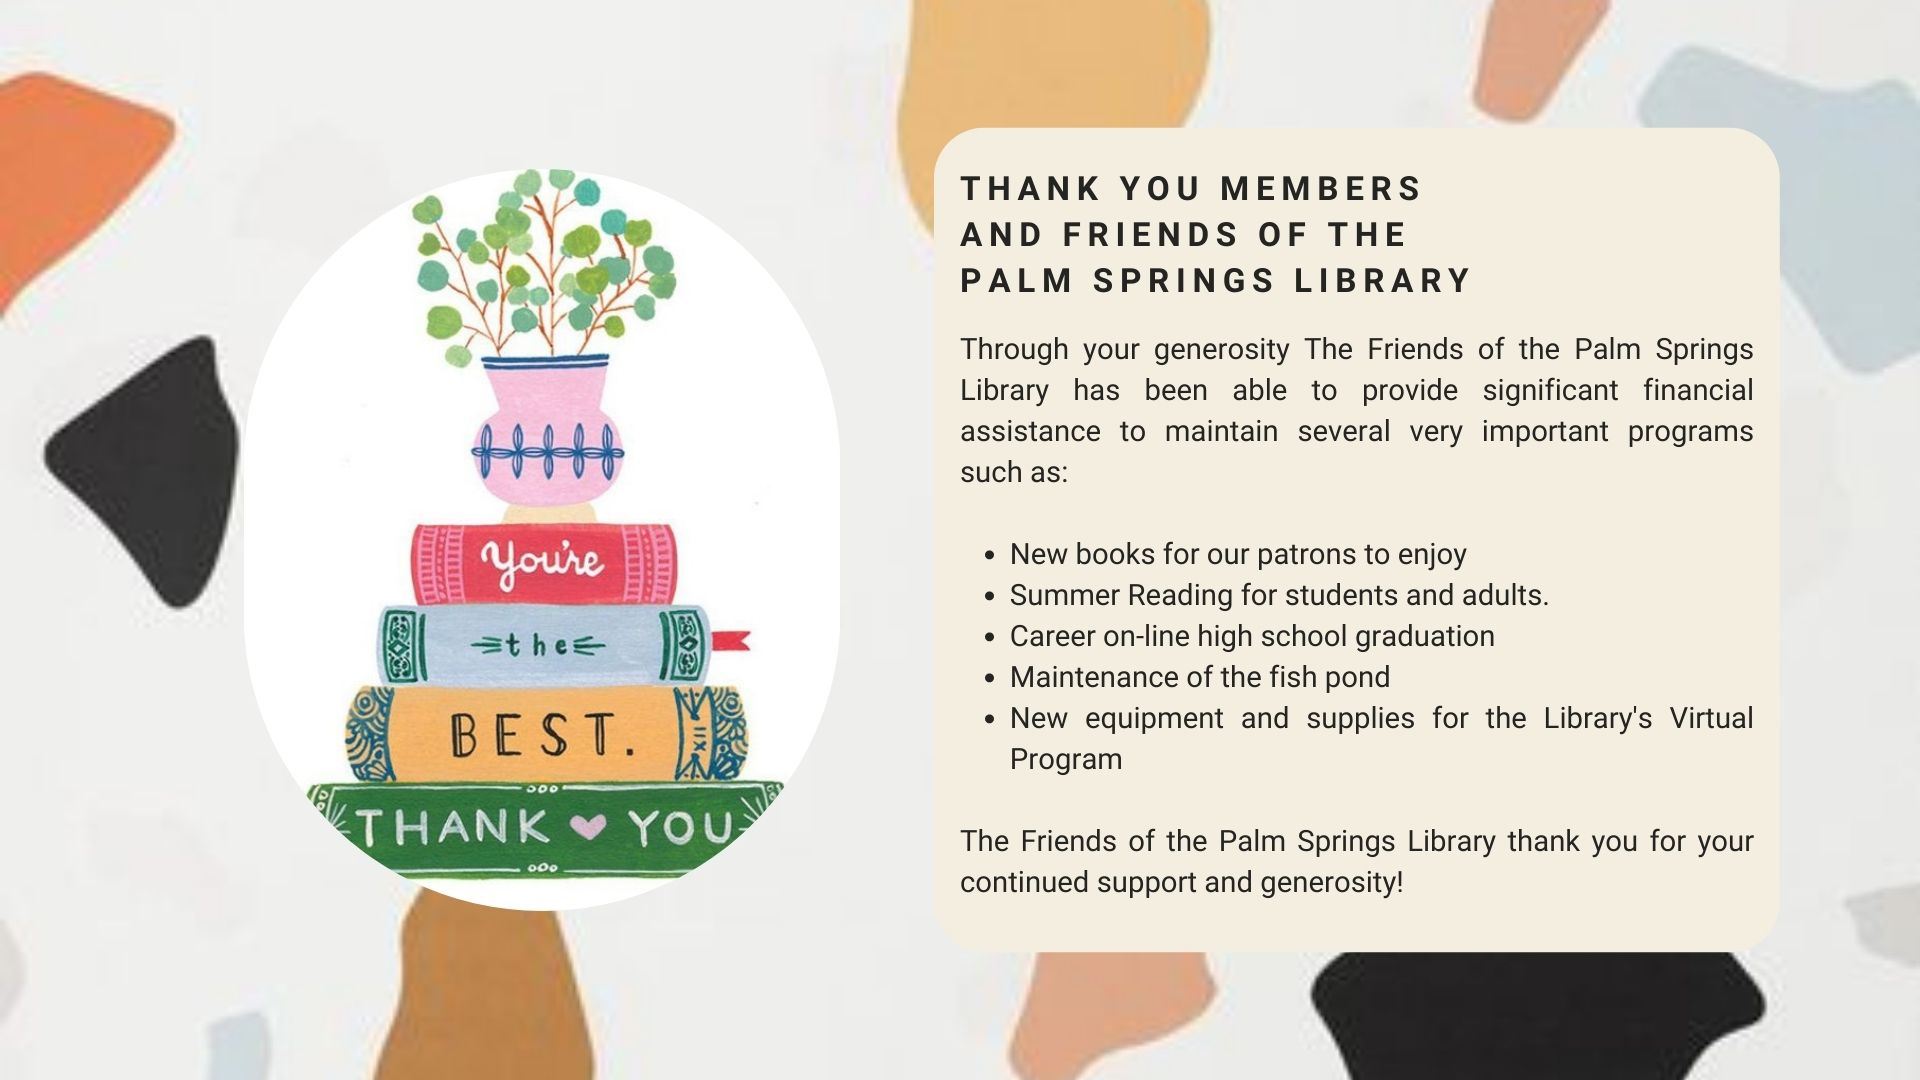 Thank you members and friends of the palm springs library. Through your generosity The Friends of the Palm Springs Library has been able to provide significant financial assistance to maintain several very important programs such as New books for our patrons to enjoy Summer Reading for students and adults. Career on-line high school graduation Maintenance of the fish pond New equipment and supplies for the Library's Virtual Program. The Friends of the Palm Springs Library thank you for your continued support and generosity!